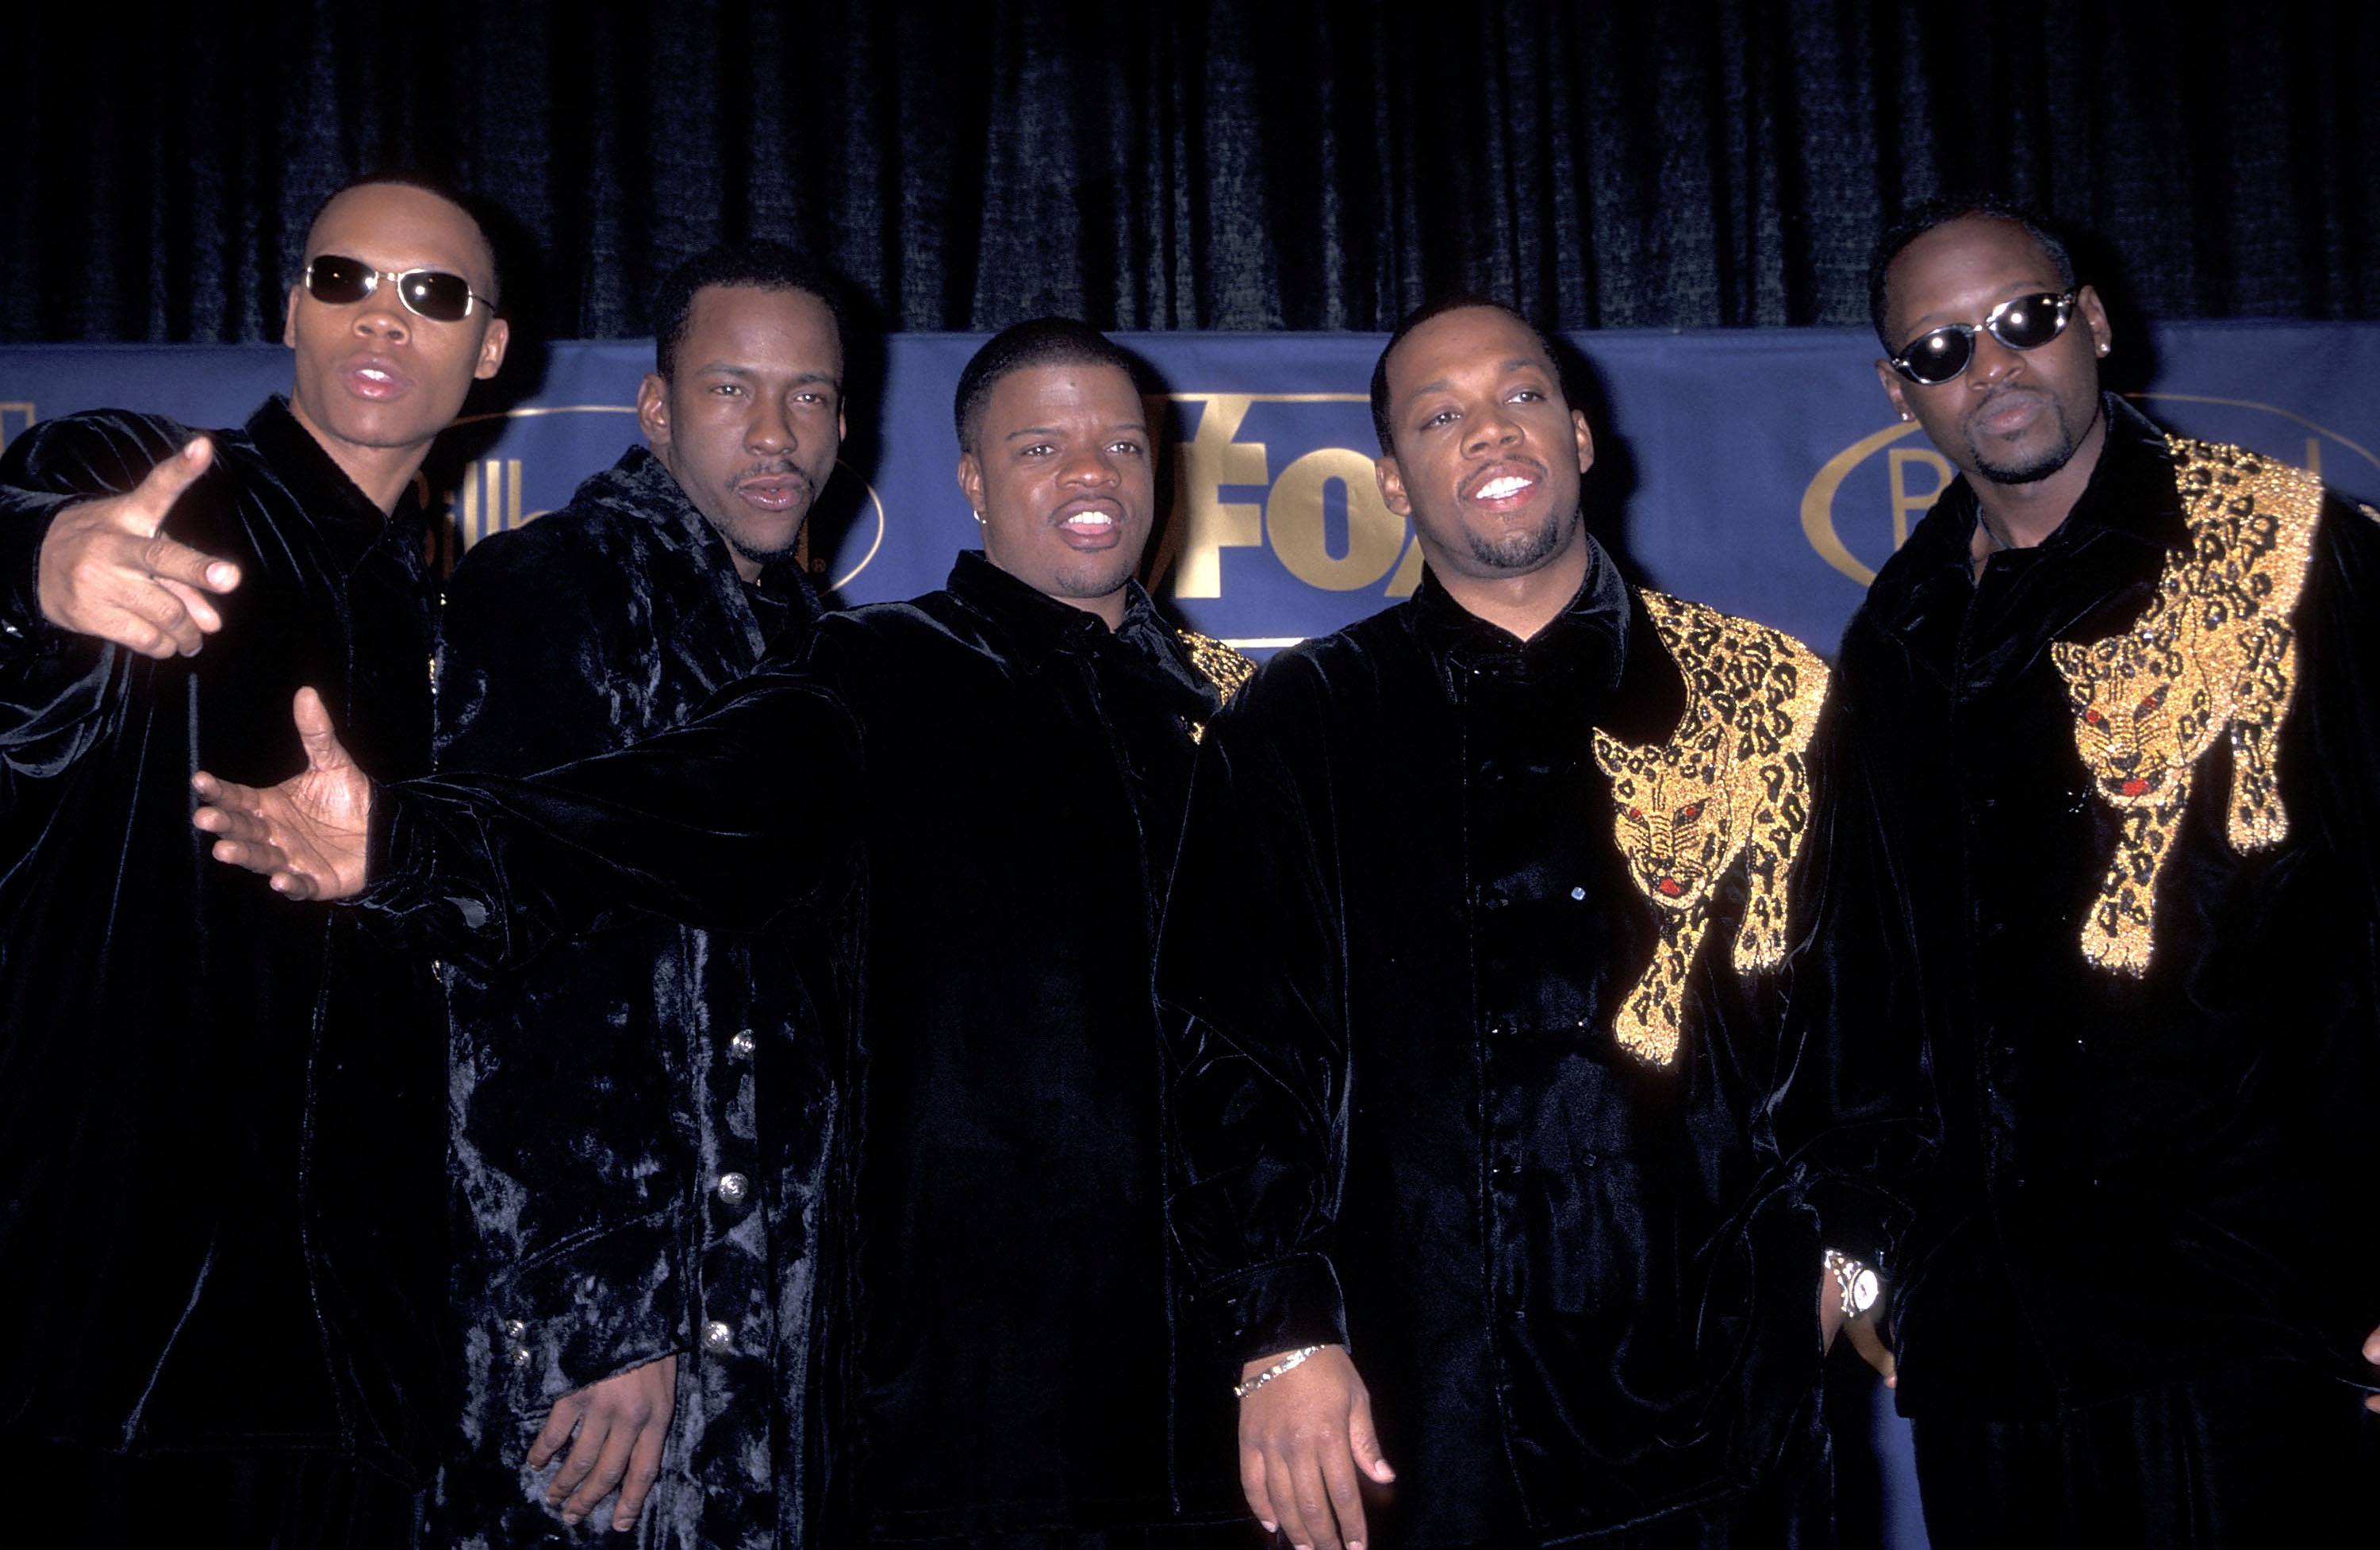 New Edition's Claim to Fame 'If It Isn't Love' - It was love at first listen after we heard New Edition's&nbsp;&quot;If It Isn't Love.&quot; The song was written by Jimmy Baskette. &nbsp; &nbsp;(Photo: Ron Galella, Ltd./WireImage)&nbsp;